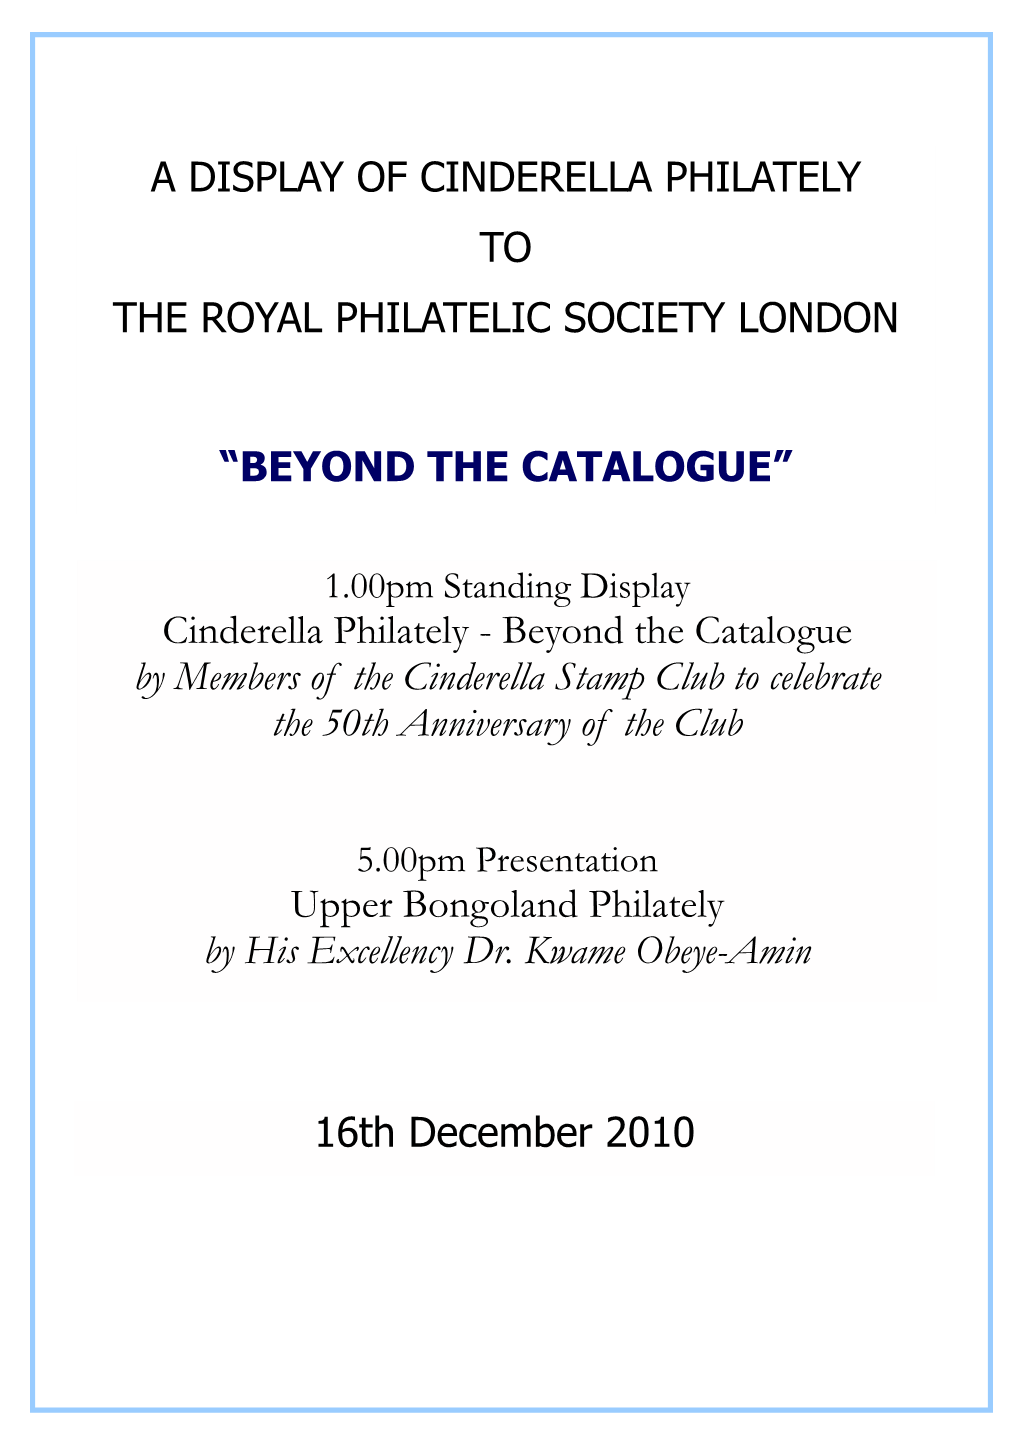 A Display of Cinderella Philately to the Royal Philatelic Society London